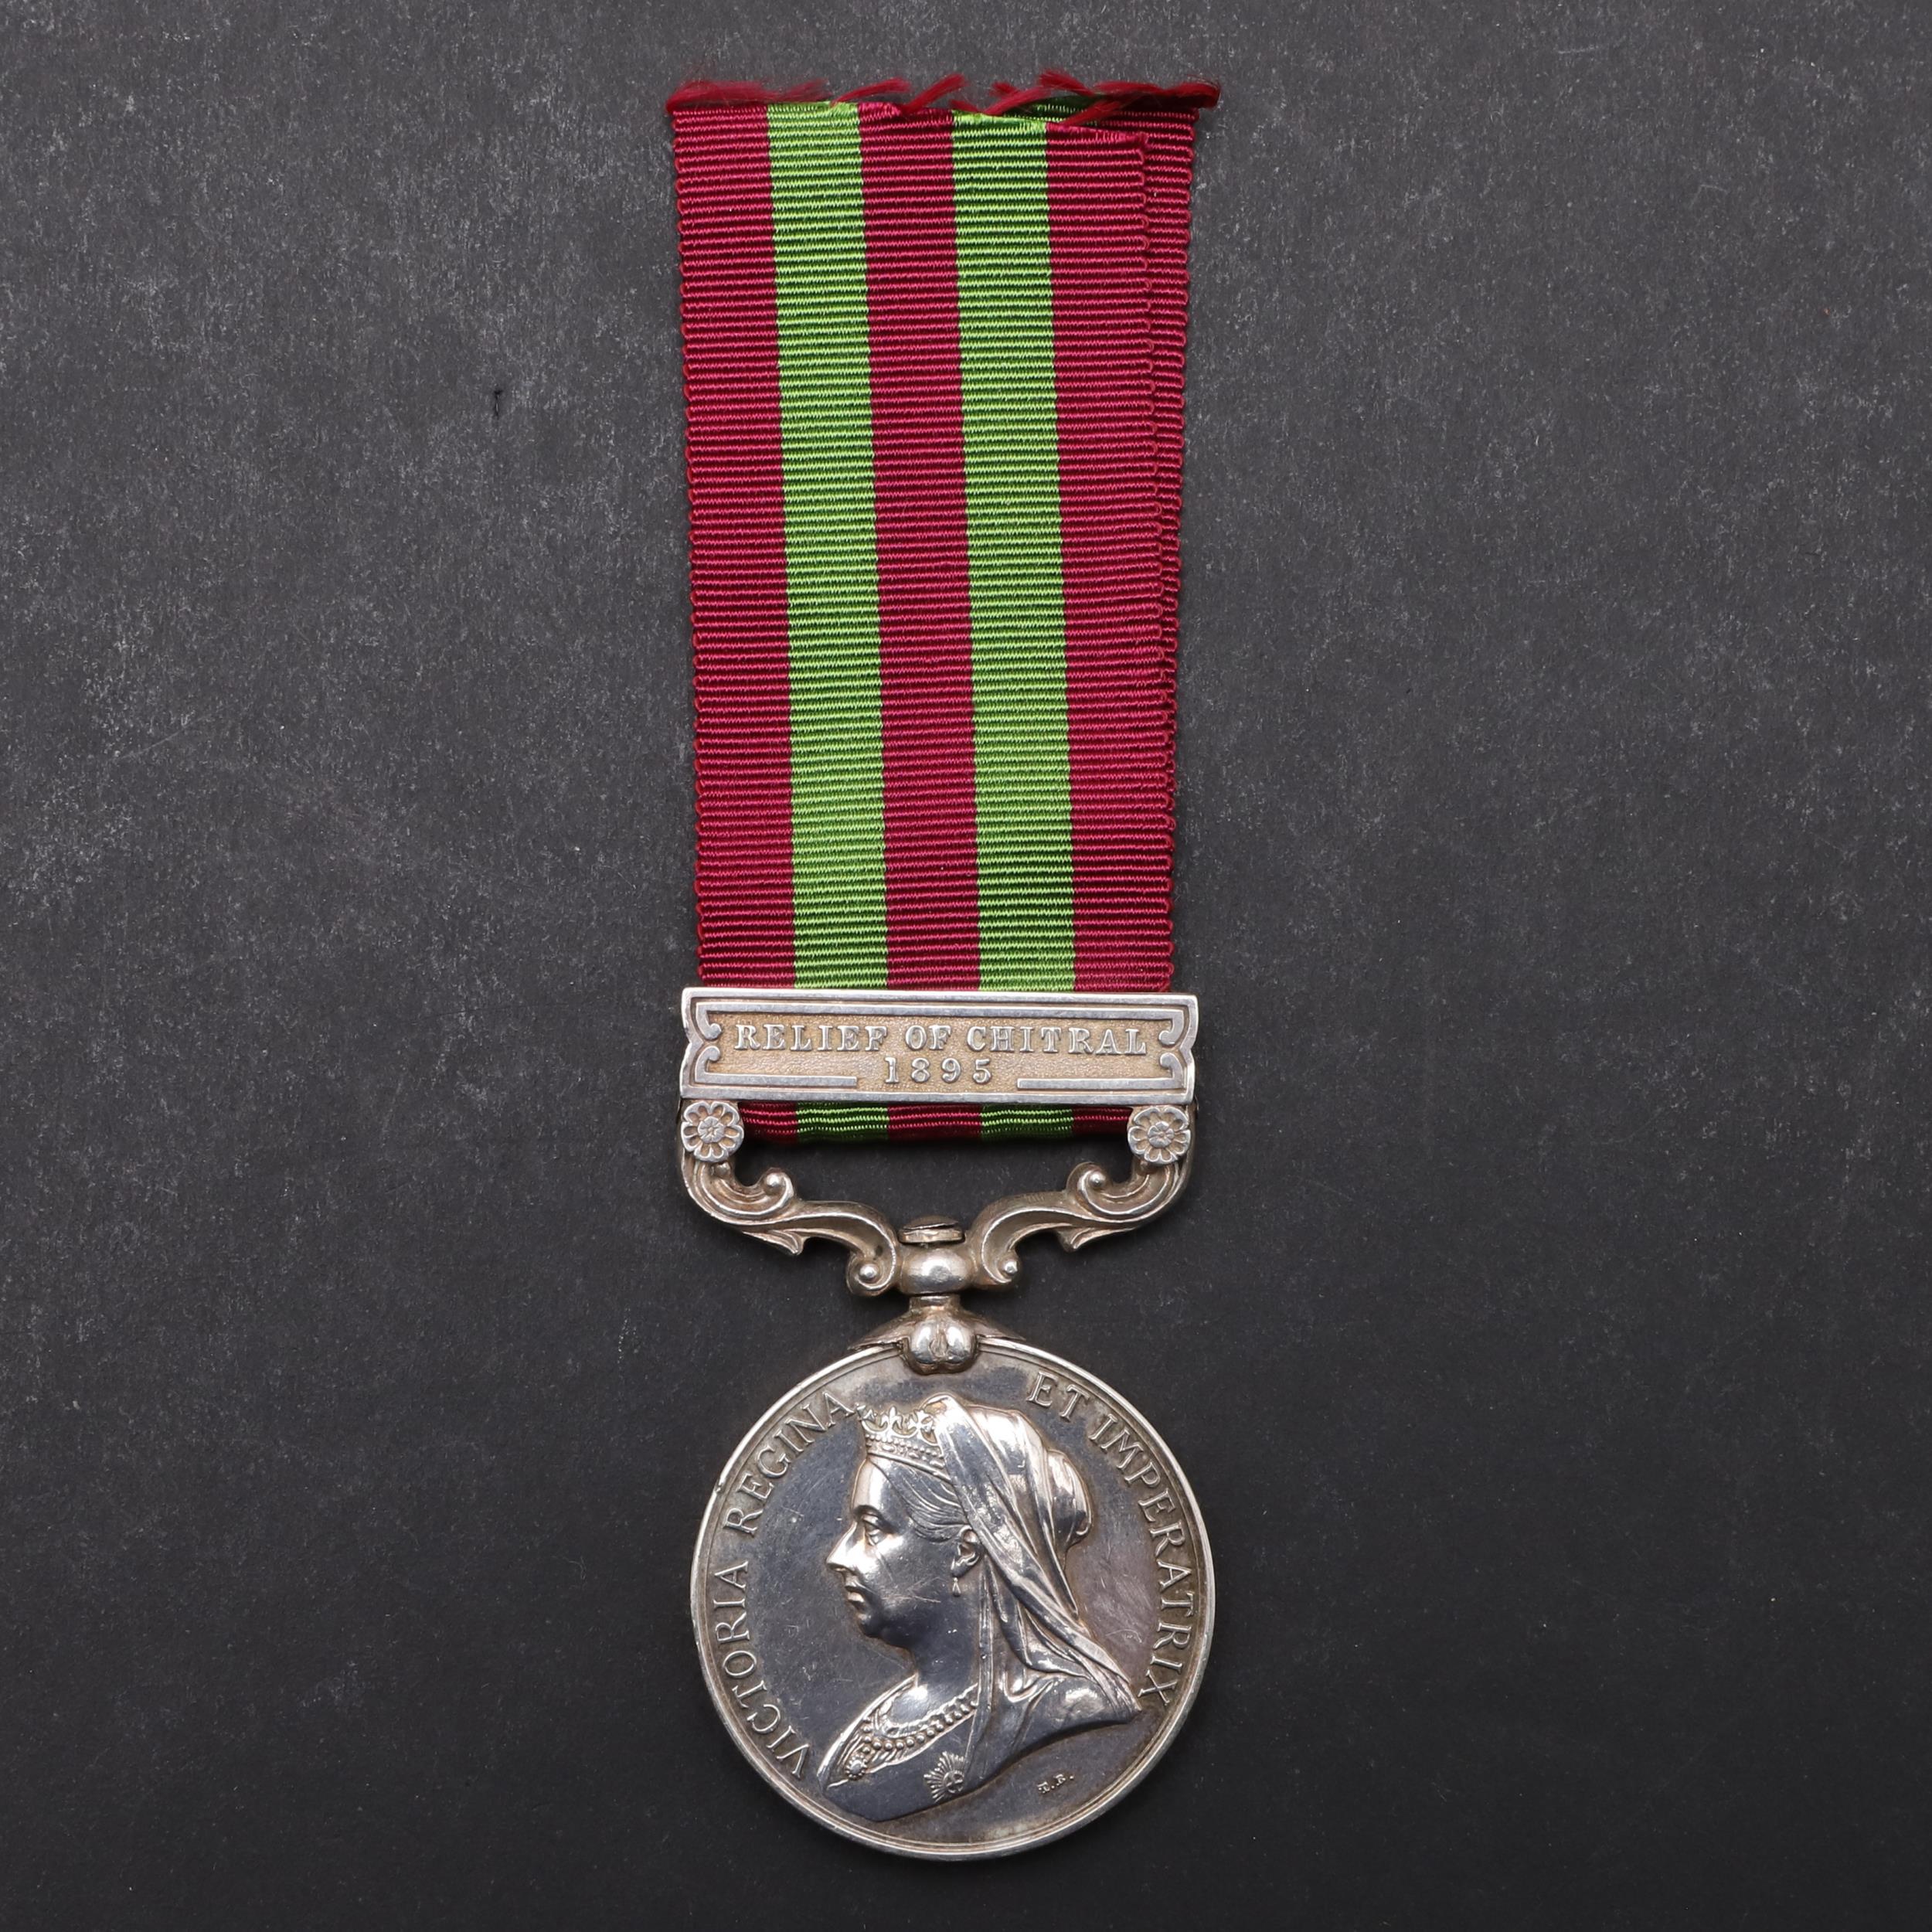 A VICTORIAN INDIA MEDAL 1896 TO THE EATS LANCS REGT.